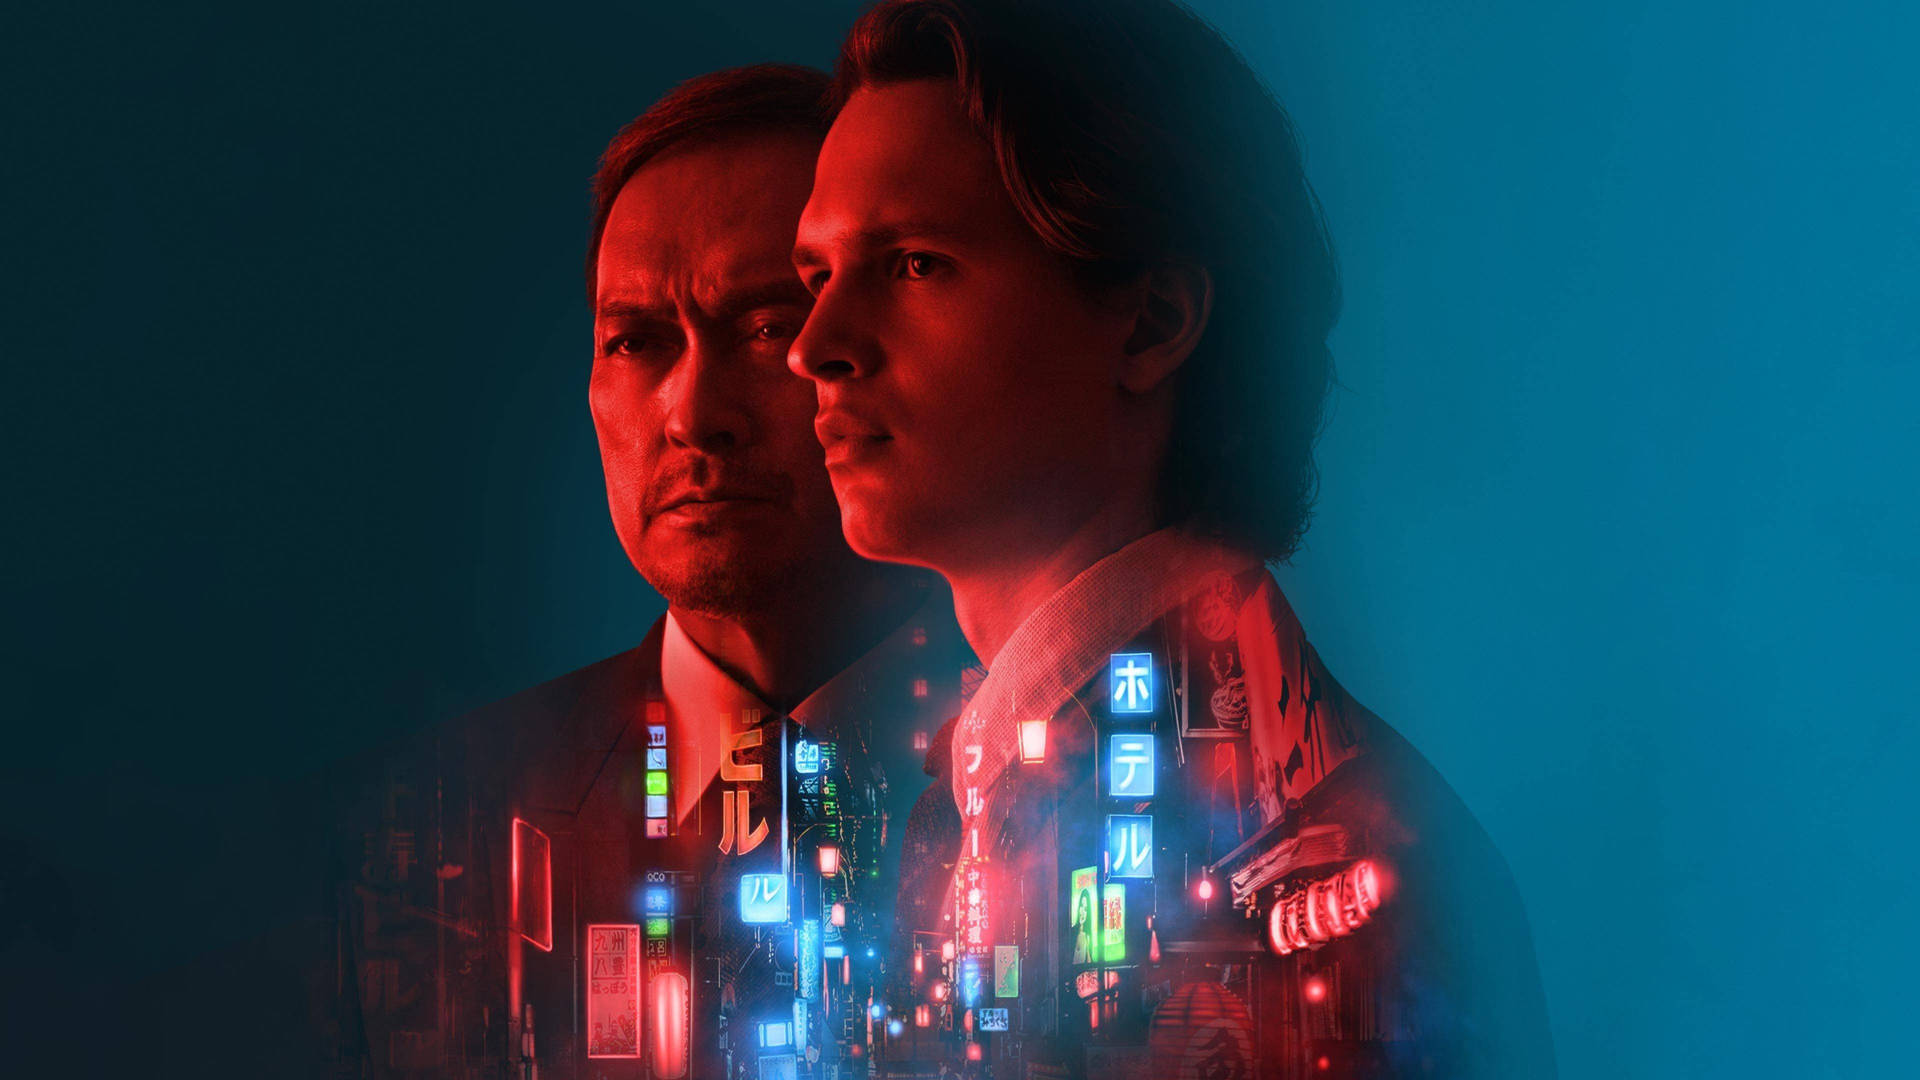 Academy Award-nominated actor Ken Watanabe with Ansel Elgort in a still from the series Tokyo Vice, 2022. Wallpaper